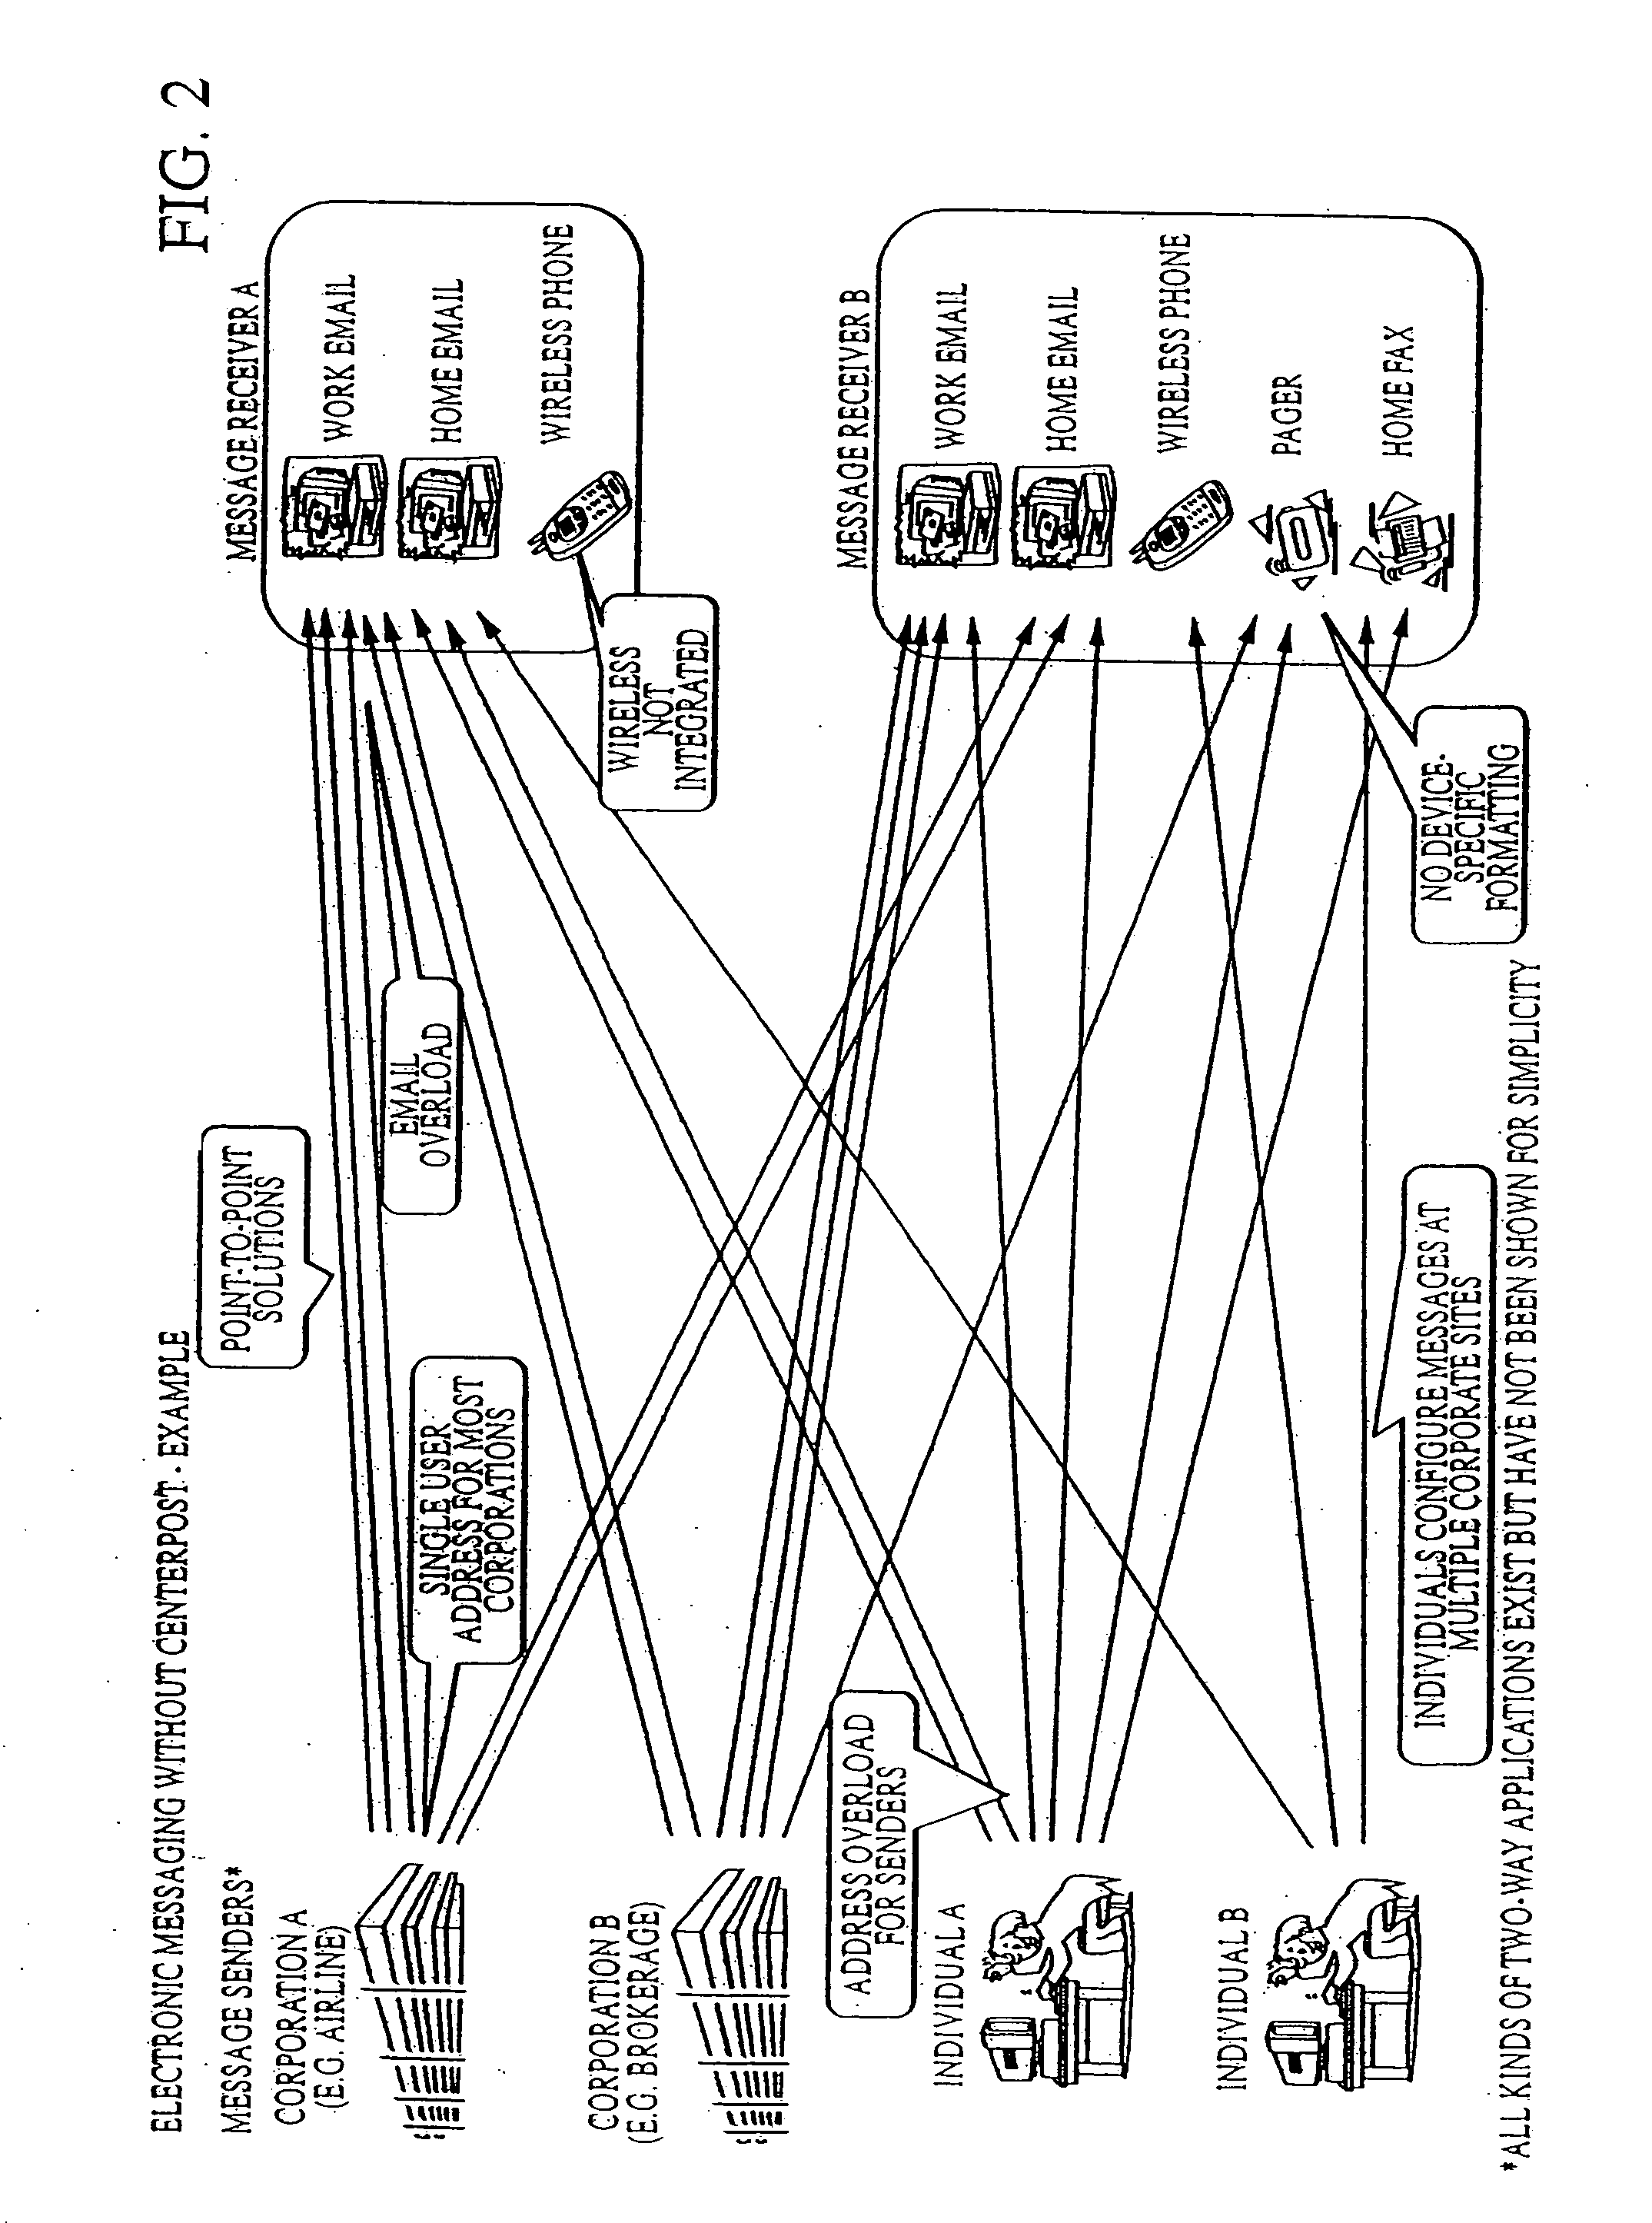 Method and system for content driven electronic messaging